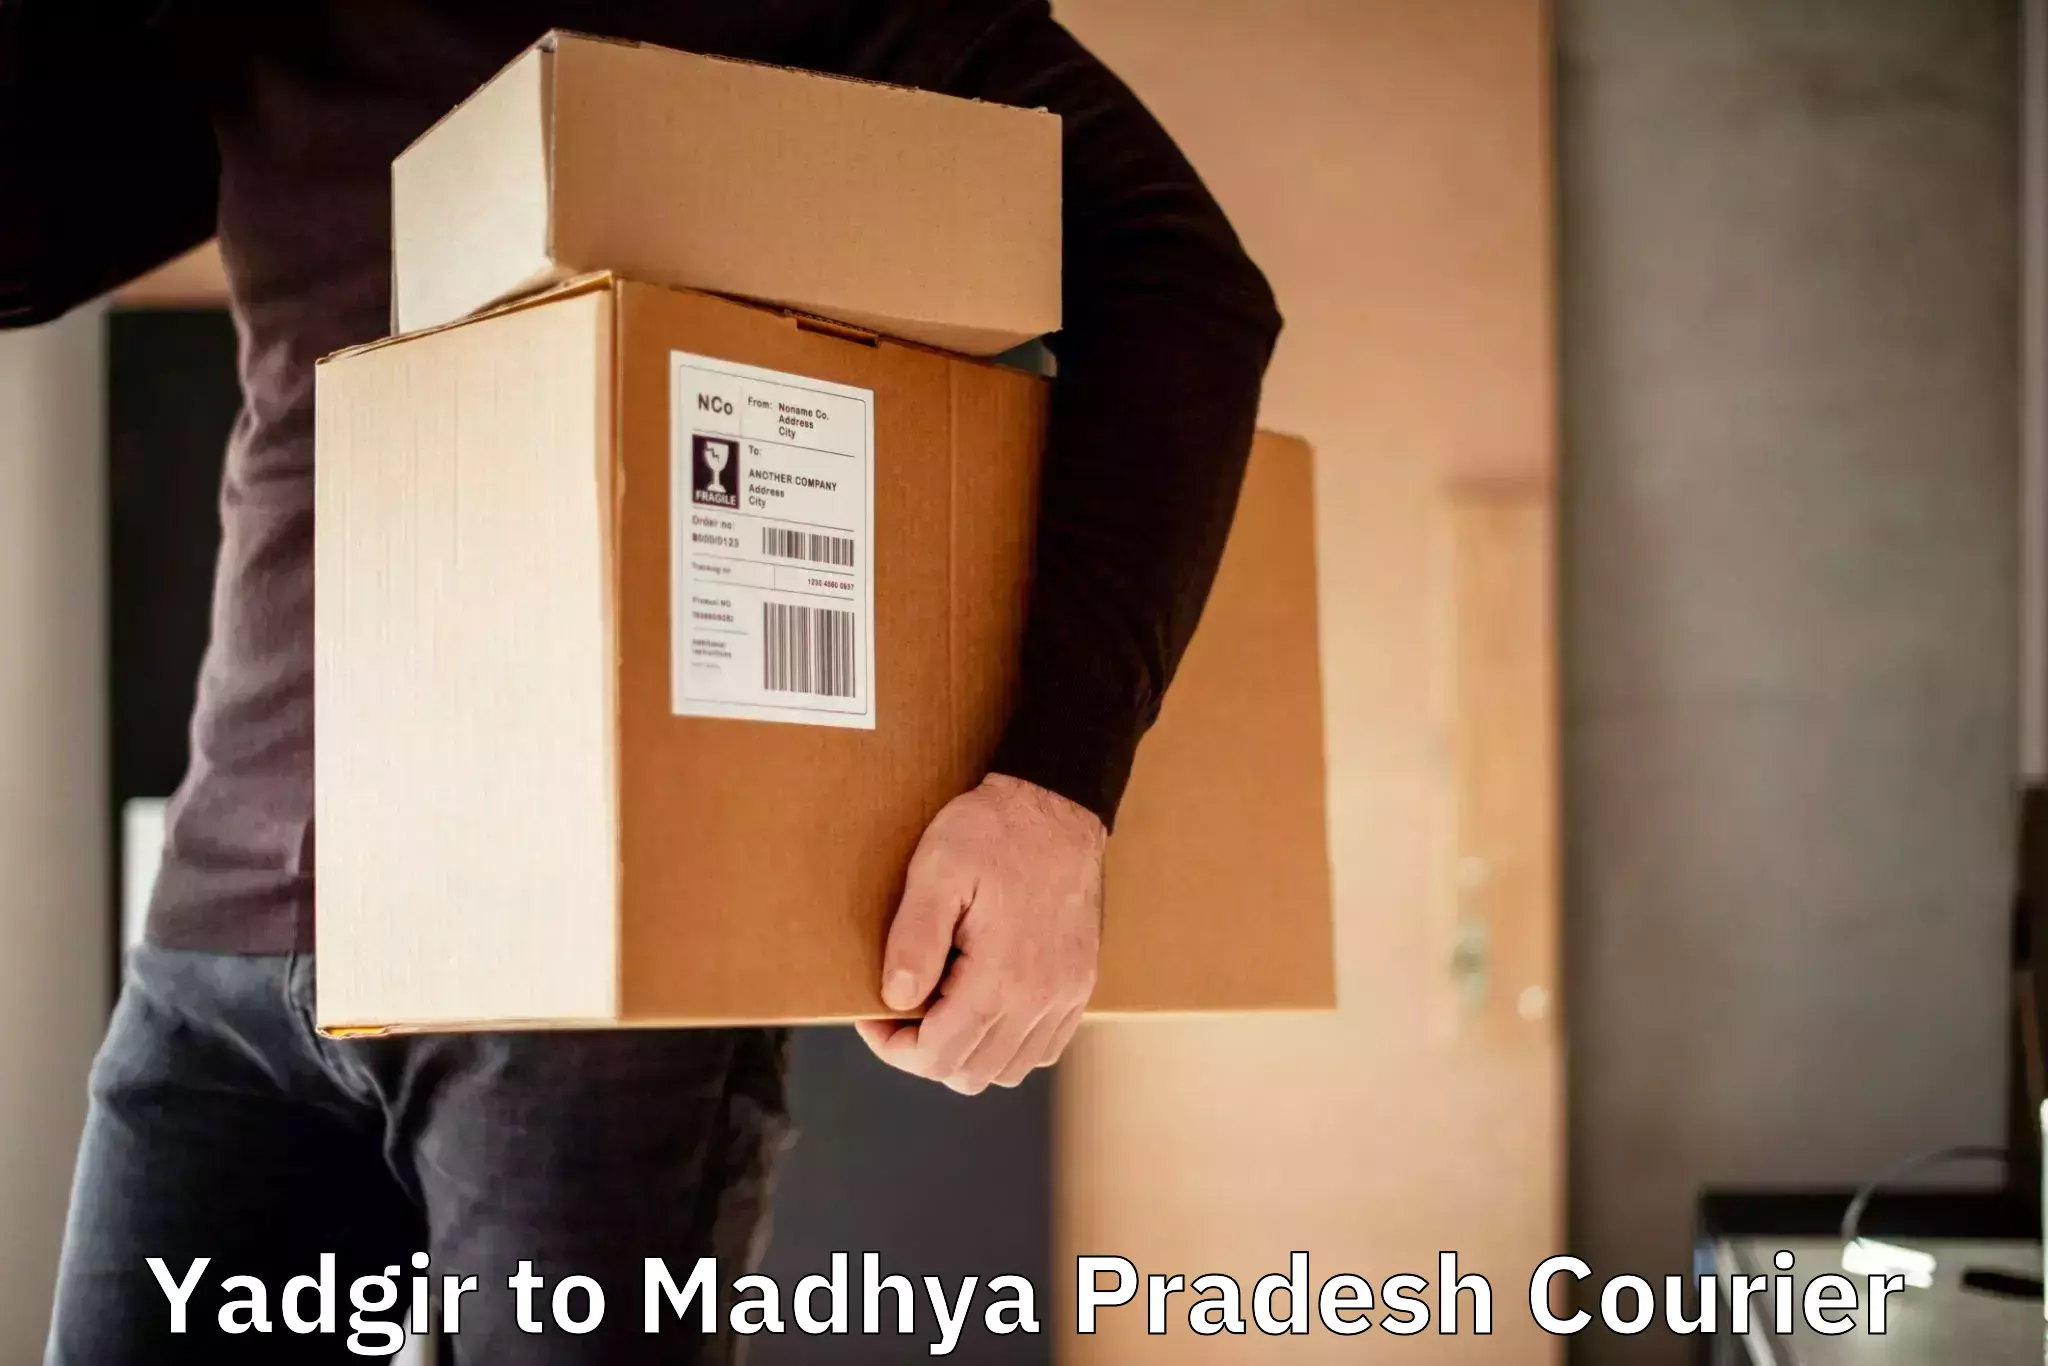 Online courier booking Yadgir to IIIT Bhopal